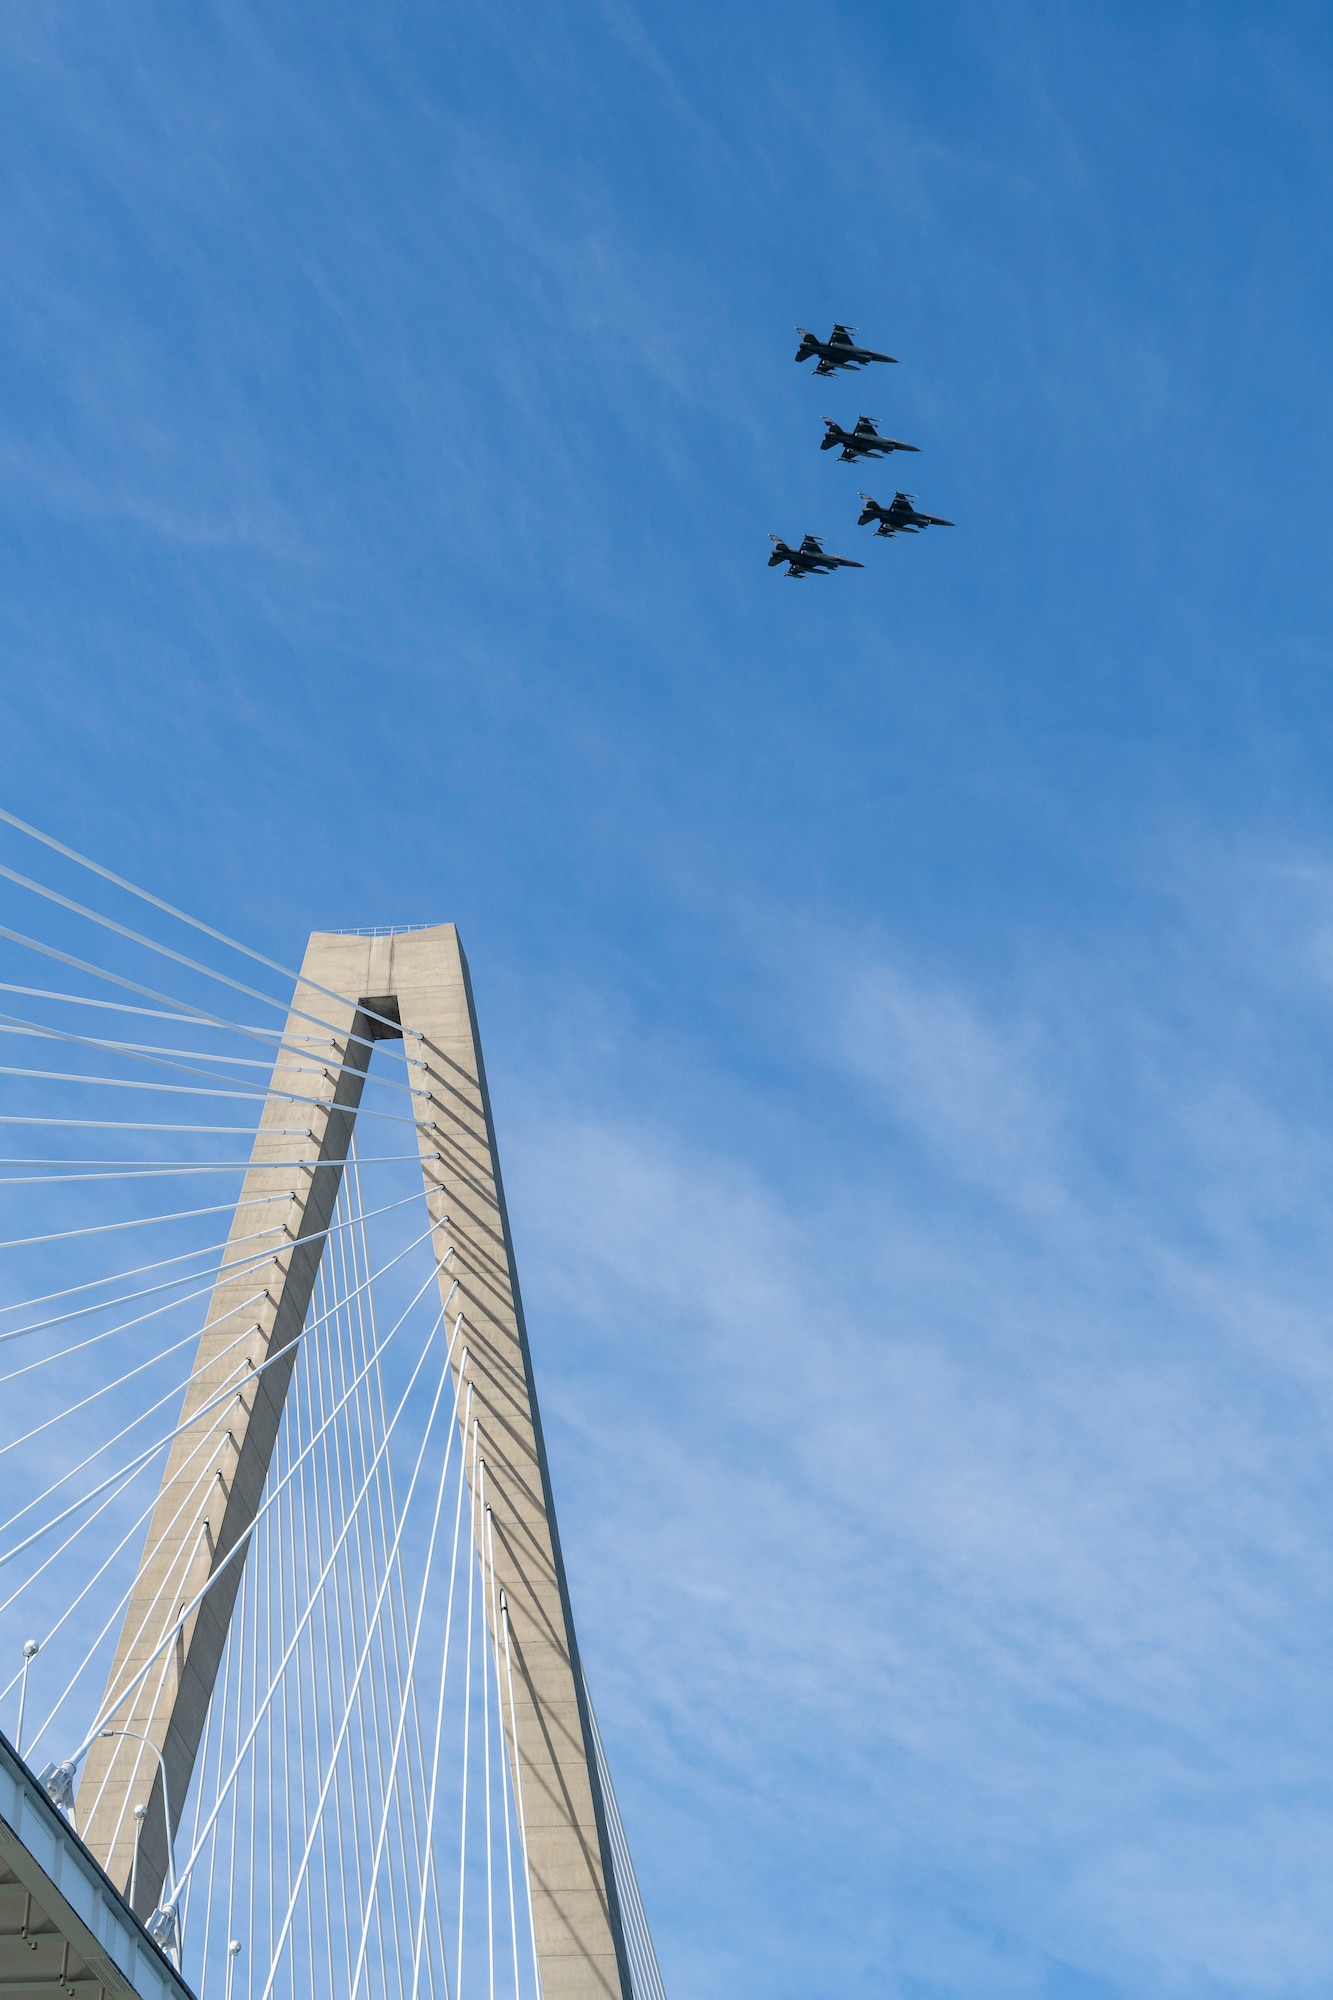 A photo of four F-16s flying over a bridge.